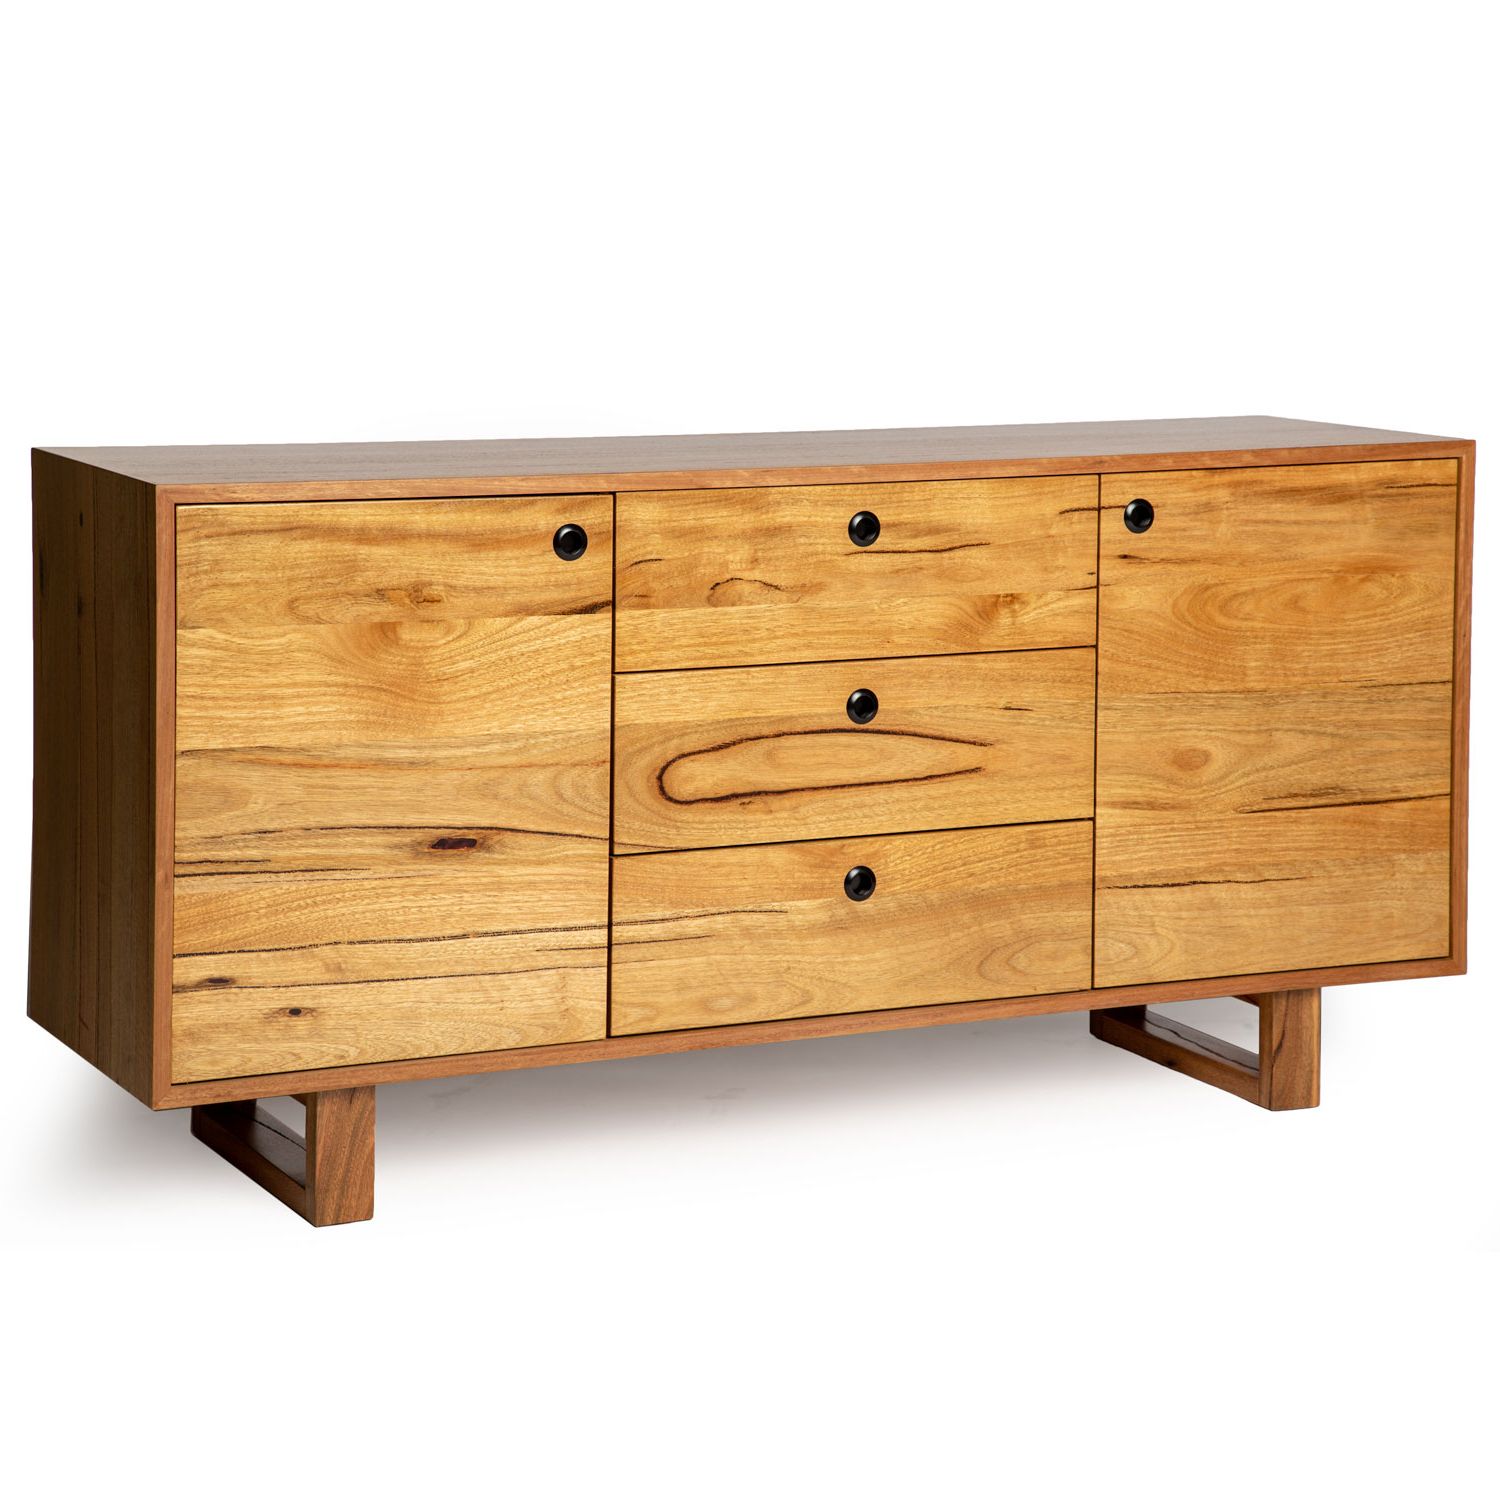 Capilano | Sideboard – Marri Wood Inside Solid Wood Contemporary Sideboards Buffets (View 16 of 20)